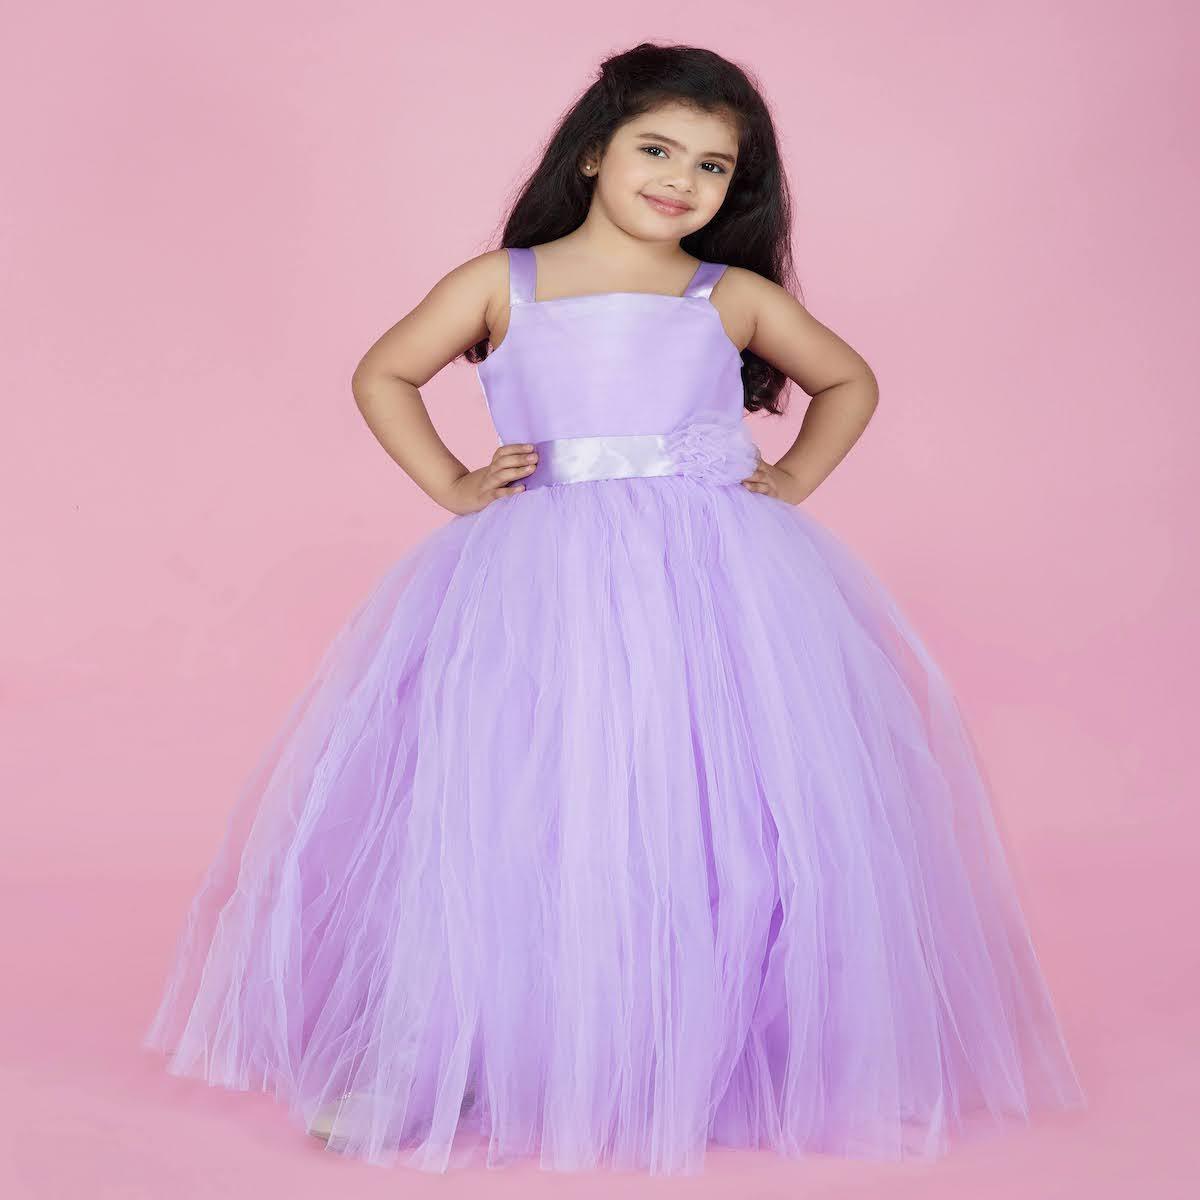 Party Dresses for Girls Online in India at StarAndDaisy